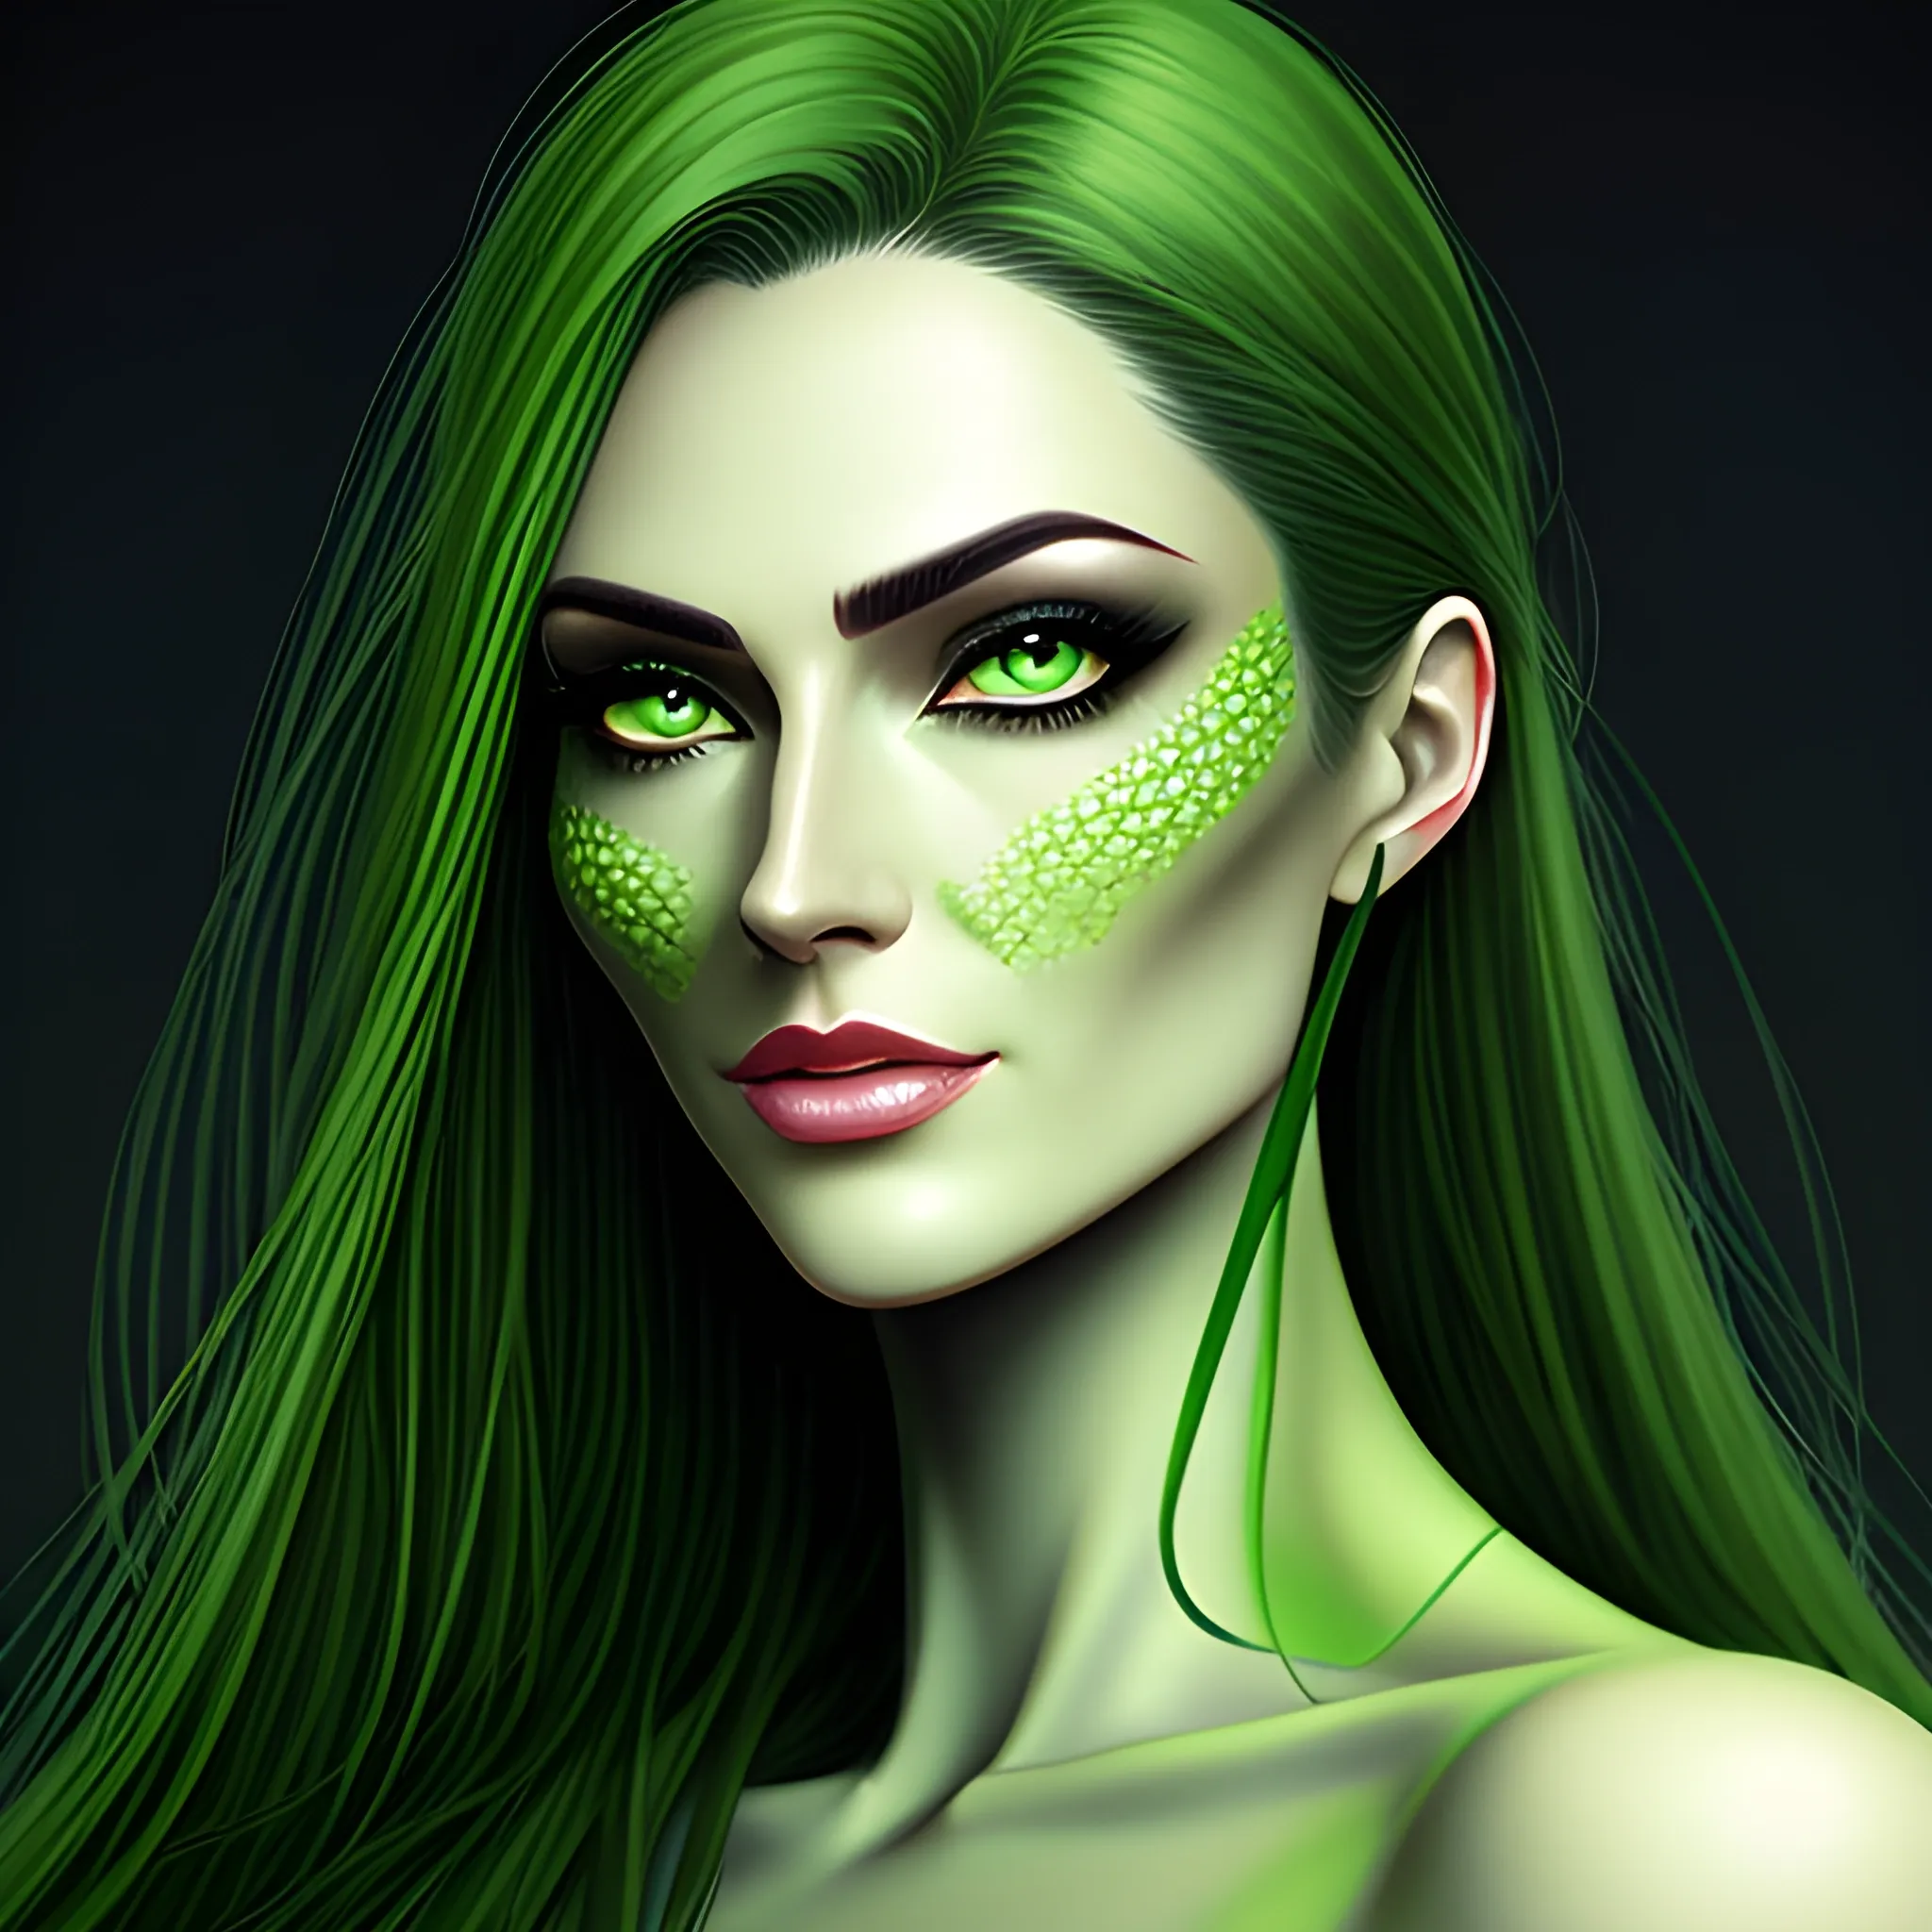 Beautiful girl with green eyes, high detail, green scene, hauntingly beautiful illustration